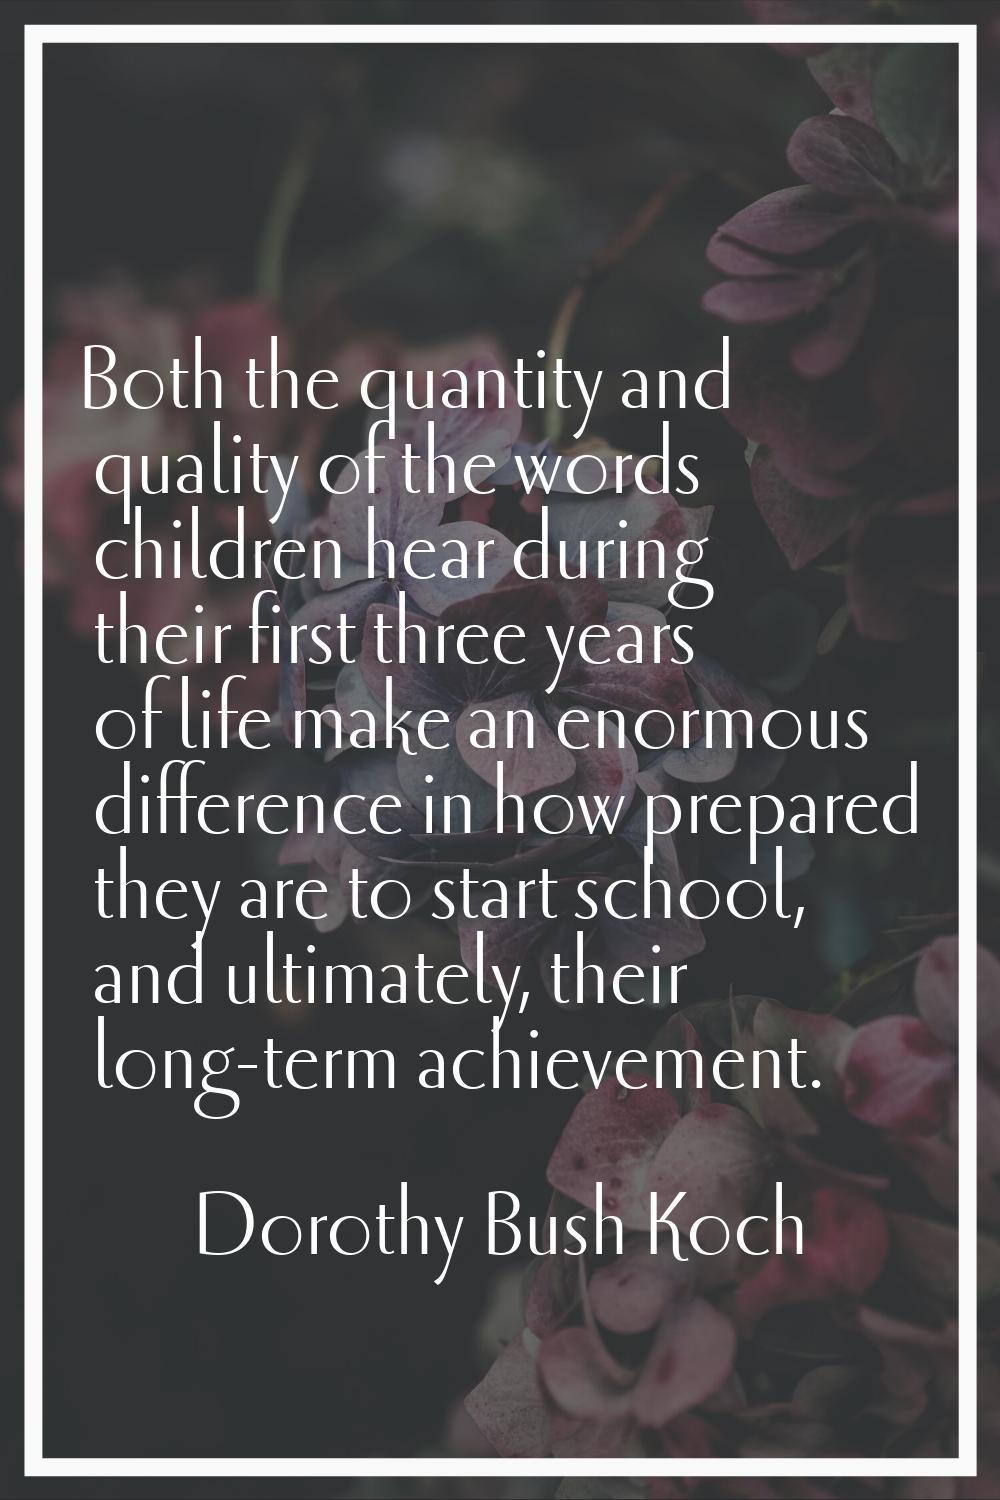 Both the quantity and quality of the words children hear during their first three years of life mak